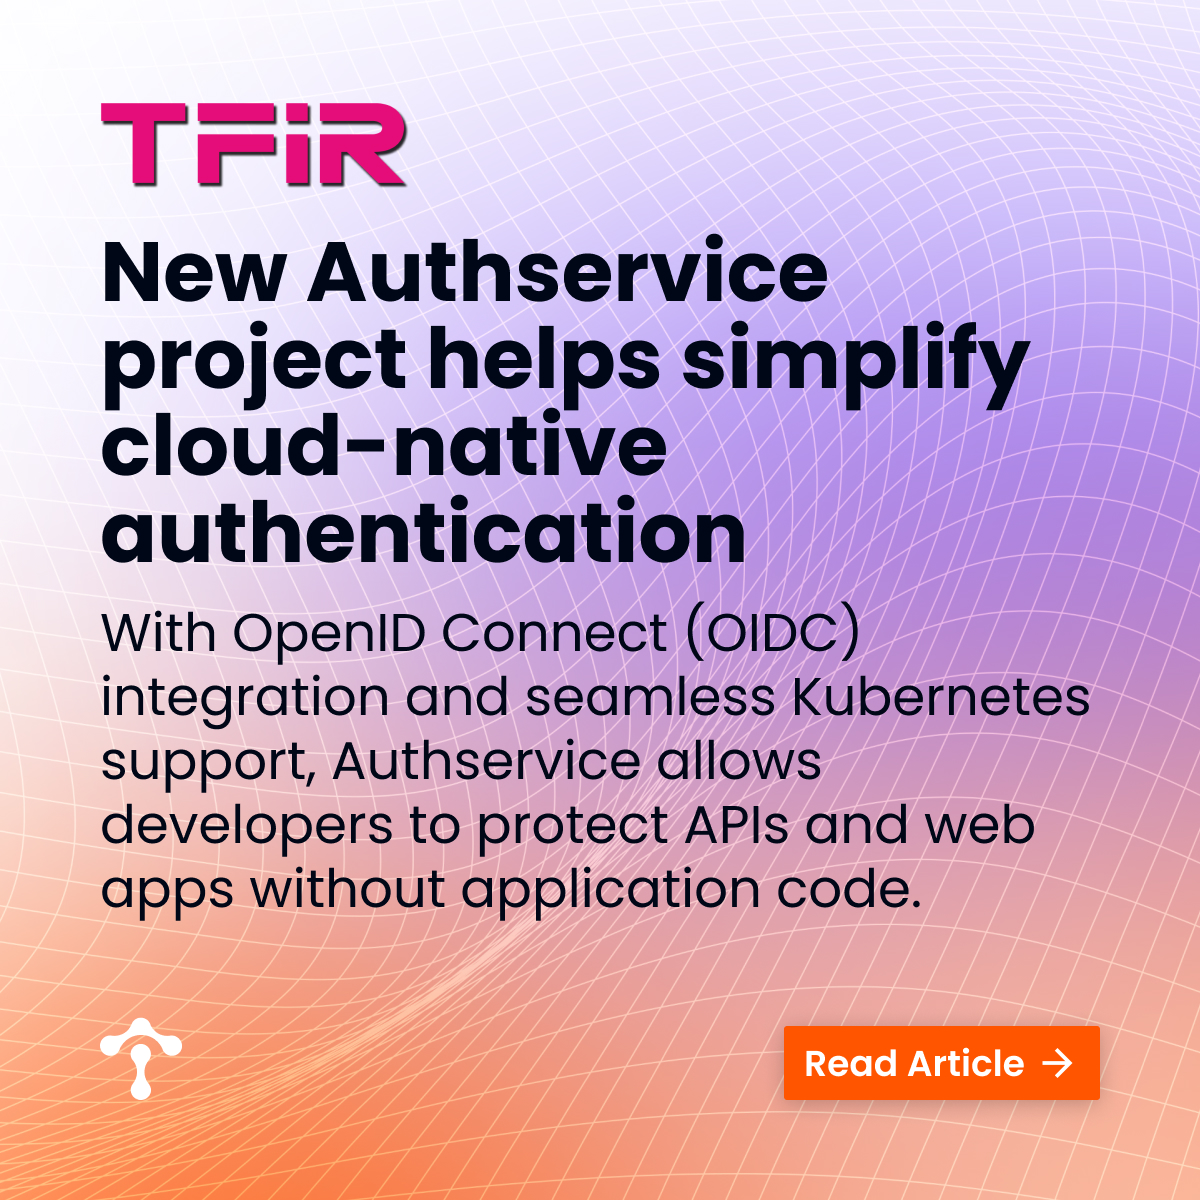 New Authservice project helps simplify cloud-native authentication tetr8.io/3Wp0803